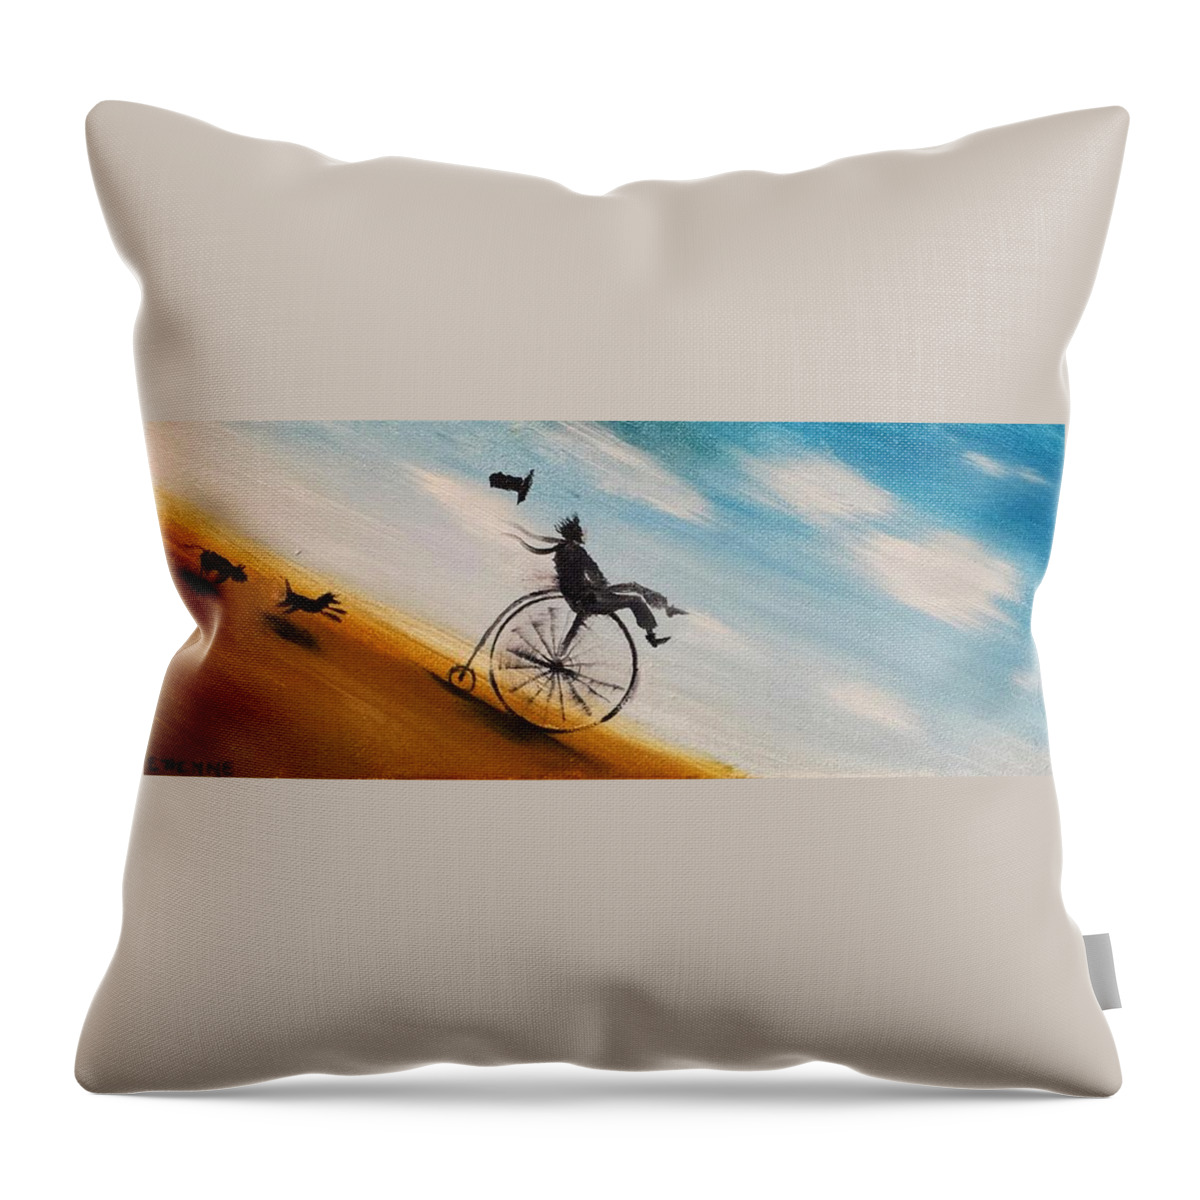 New From The Artist Throw Pillow featuring the painting Who needs brakes? by Jason Etienne